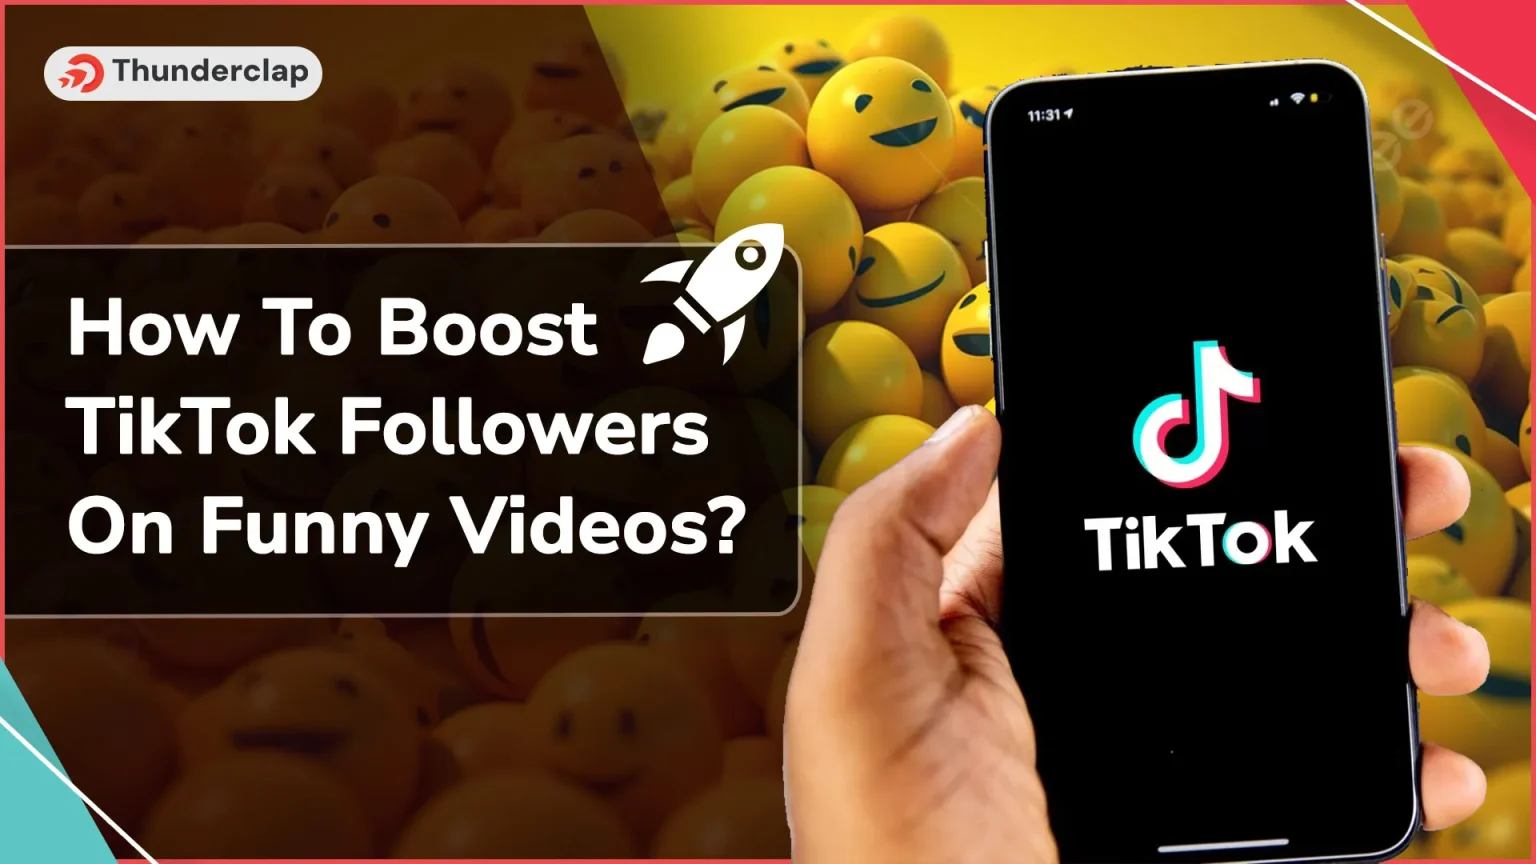 How To Boost TikTok Followers On Funny Videos